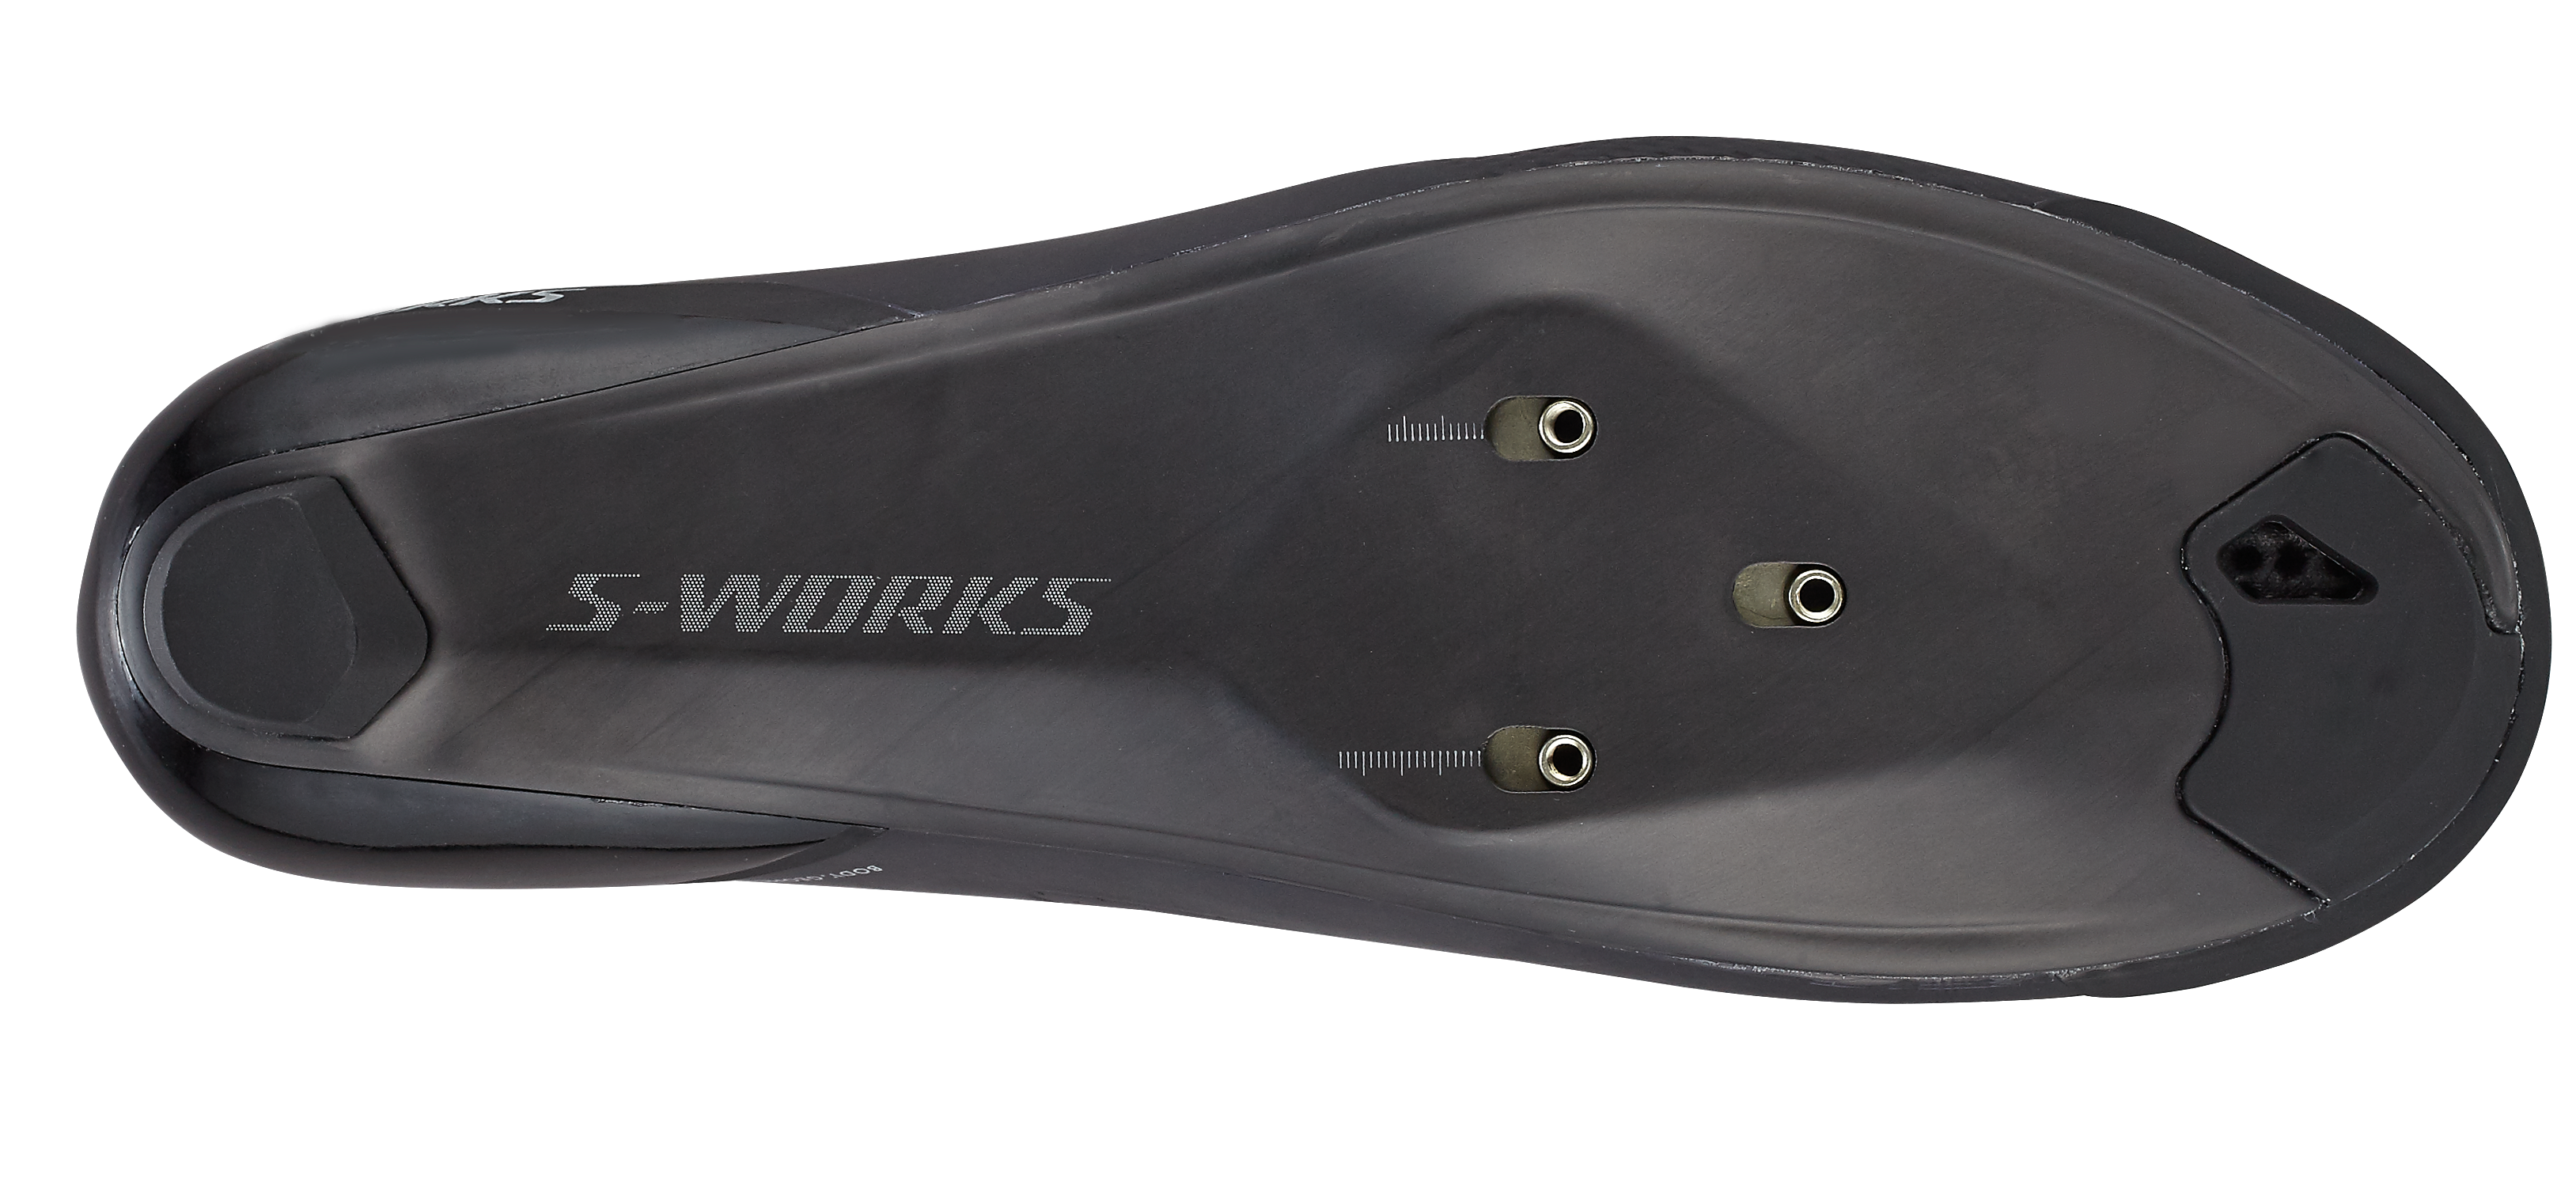 S WORKS TORCH ROAD SHOES BLK  cm ブラック: シューズ